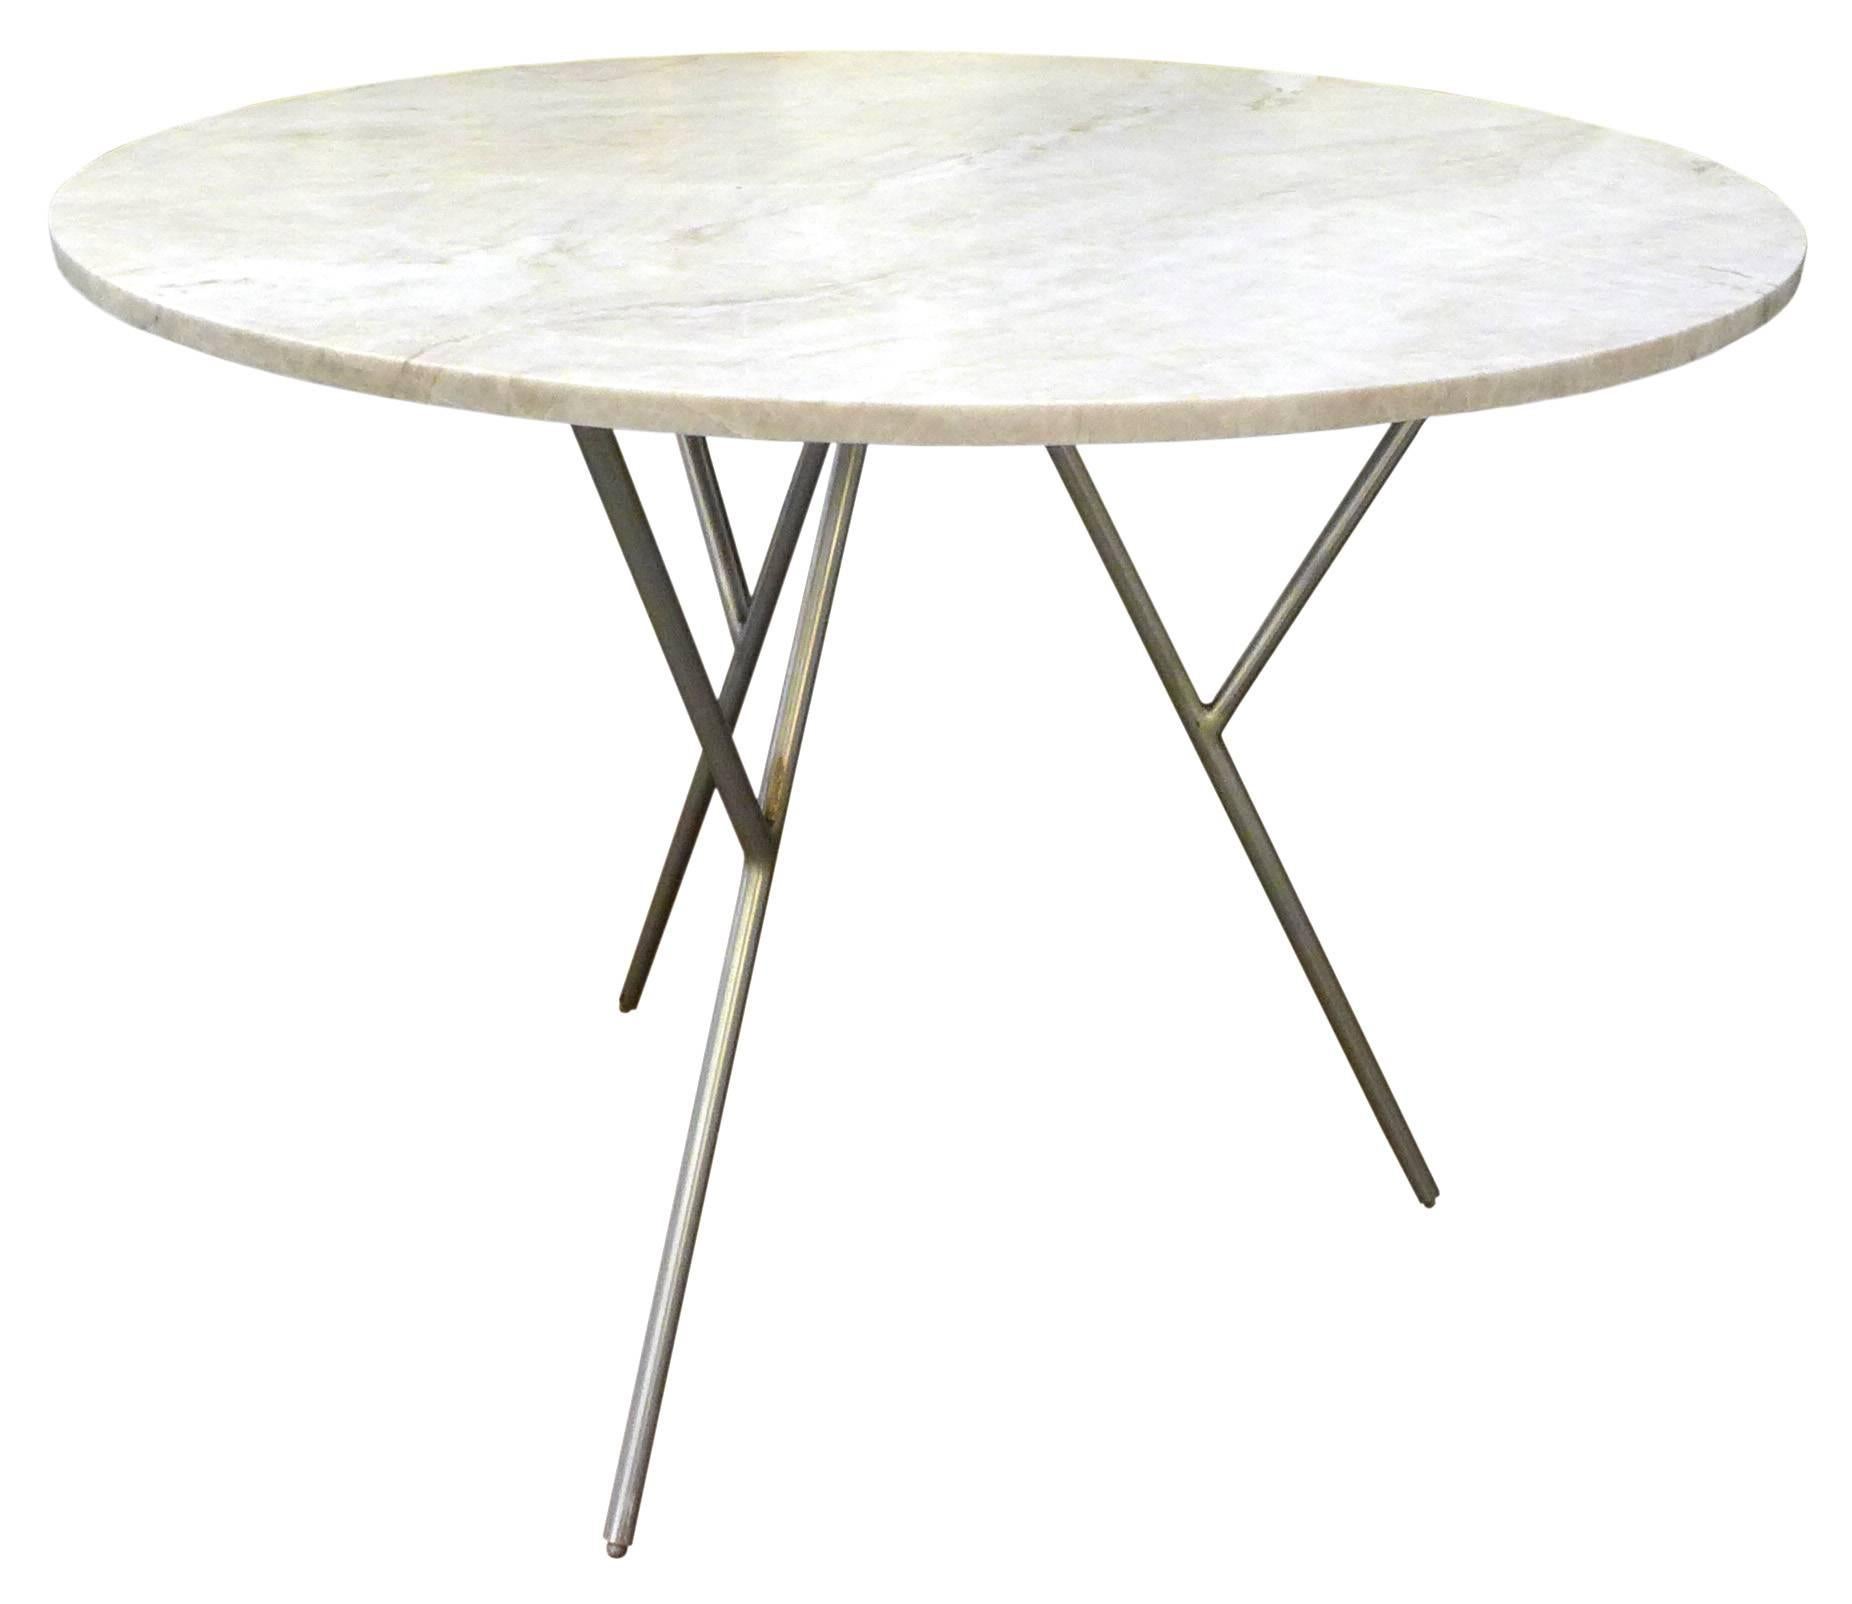 A fantastic travertine and steel dining table. A tripod base of welded, brushed steel; slender, splayed legs each with a jutting buttress for supporting a contemporary, round travertine tabletop. The base is beautifully constructed of heavy,